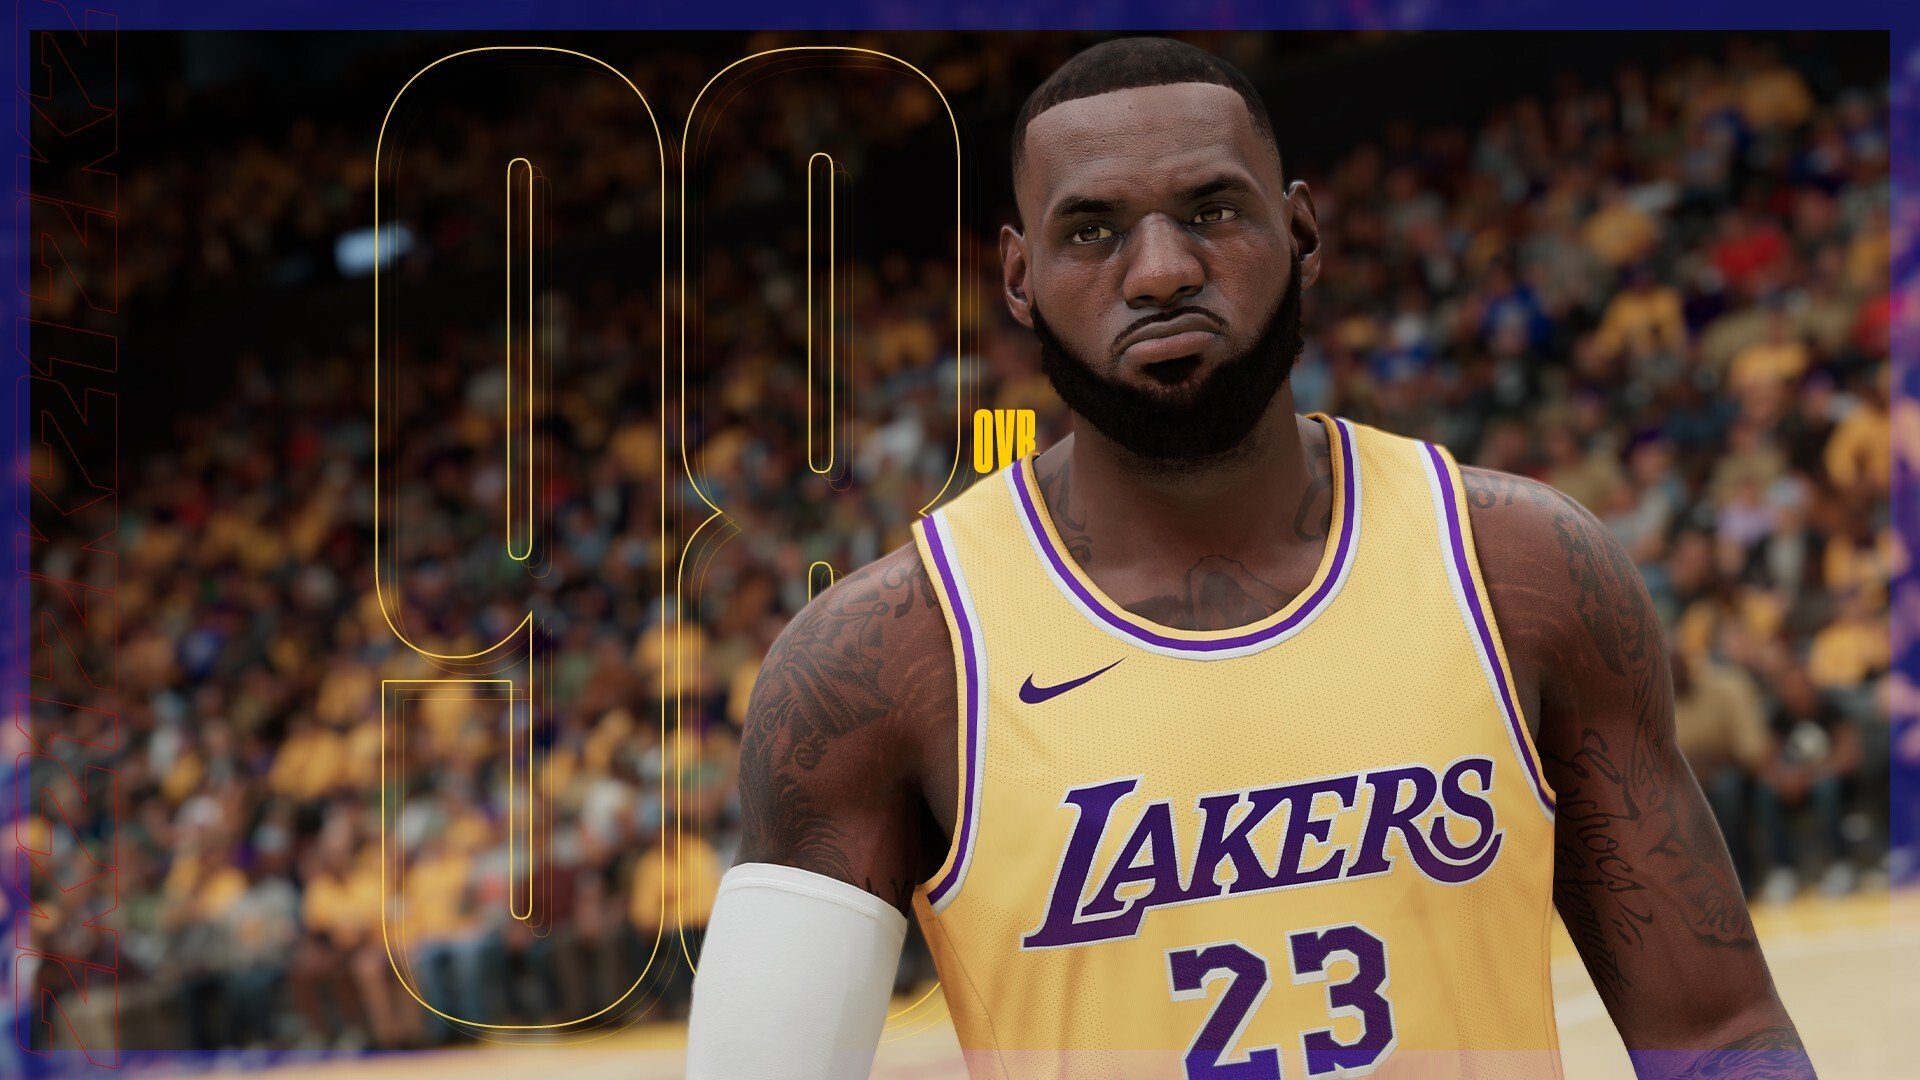 Take on the best of the best. Photo: 2K Games